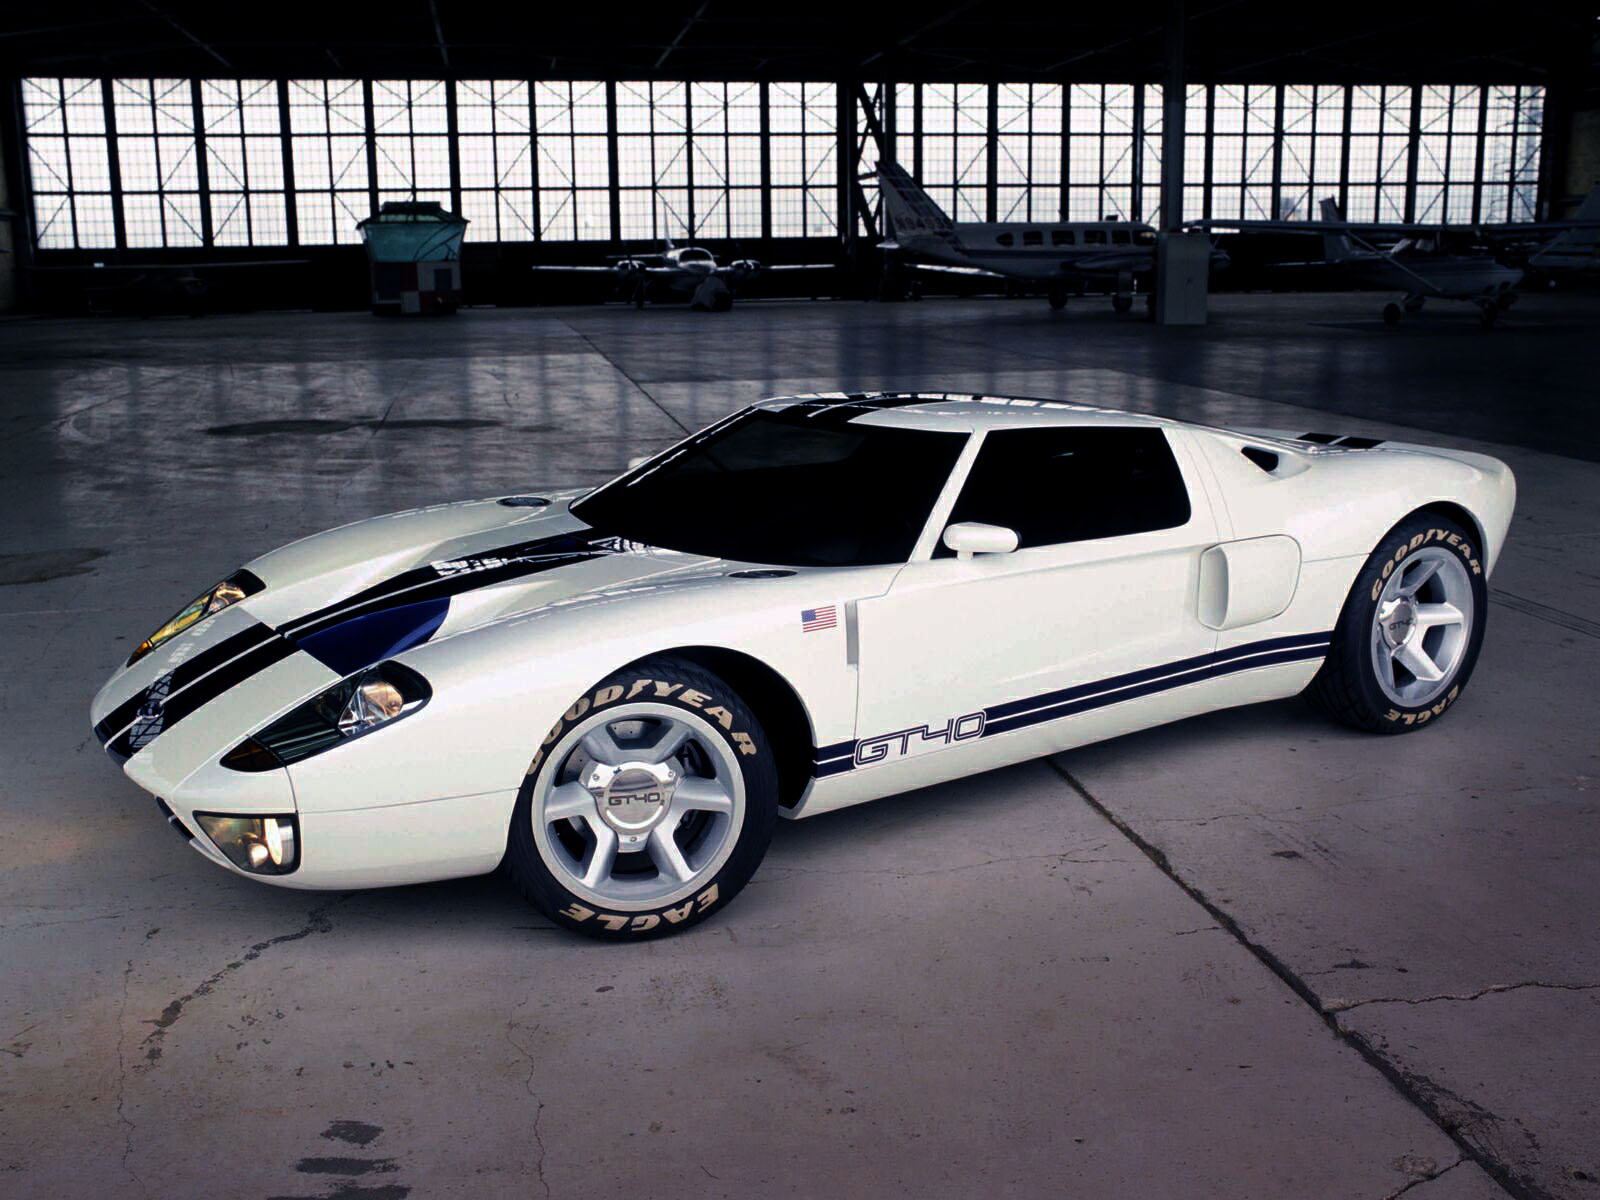 Ford GT Wallpaper Background 11410 | Gtoss.